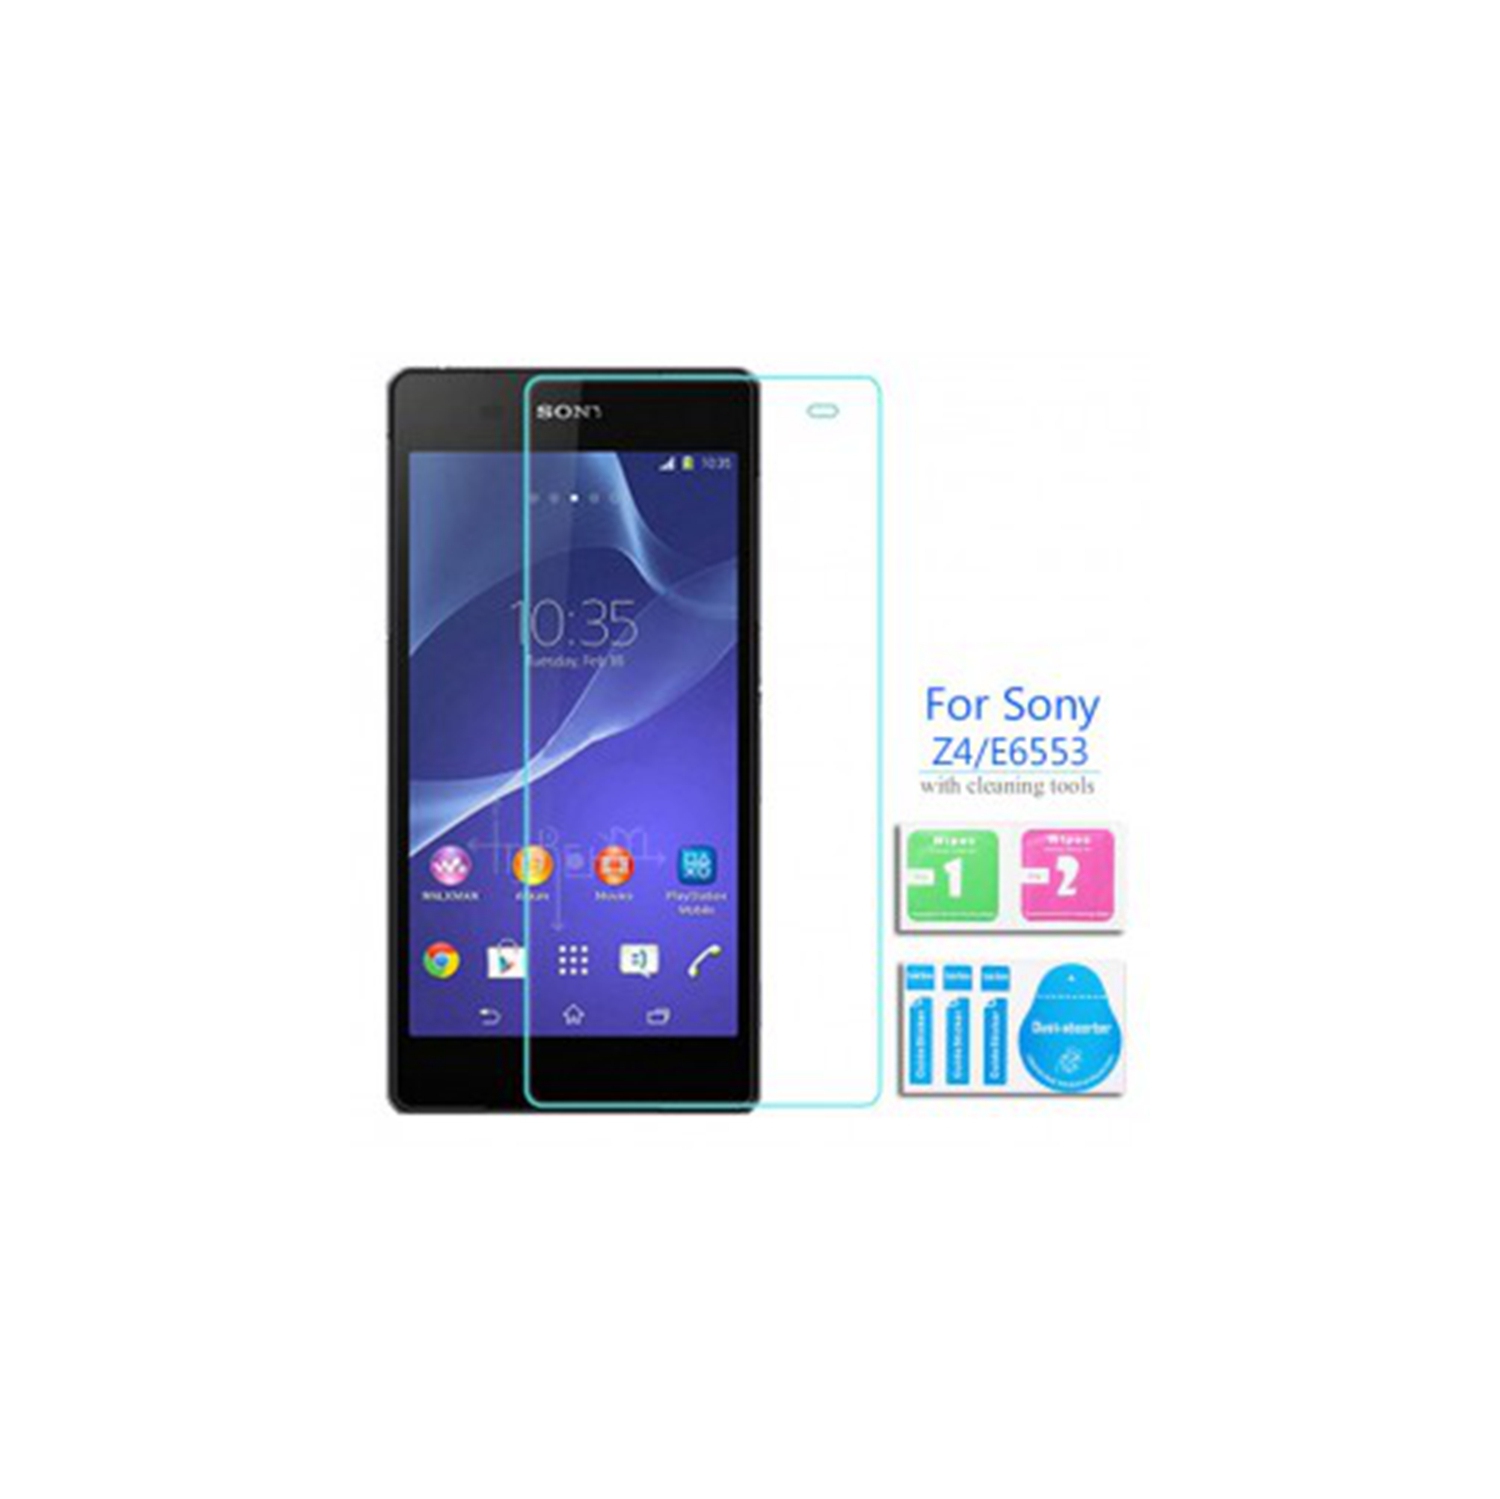 【2 Packs】 CSmart Premium Tempered Glass Screen Protector for Sony Z4, Case Friendly & Bubble Free